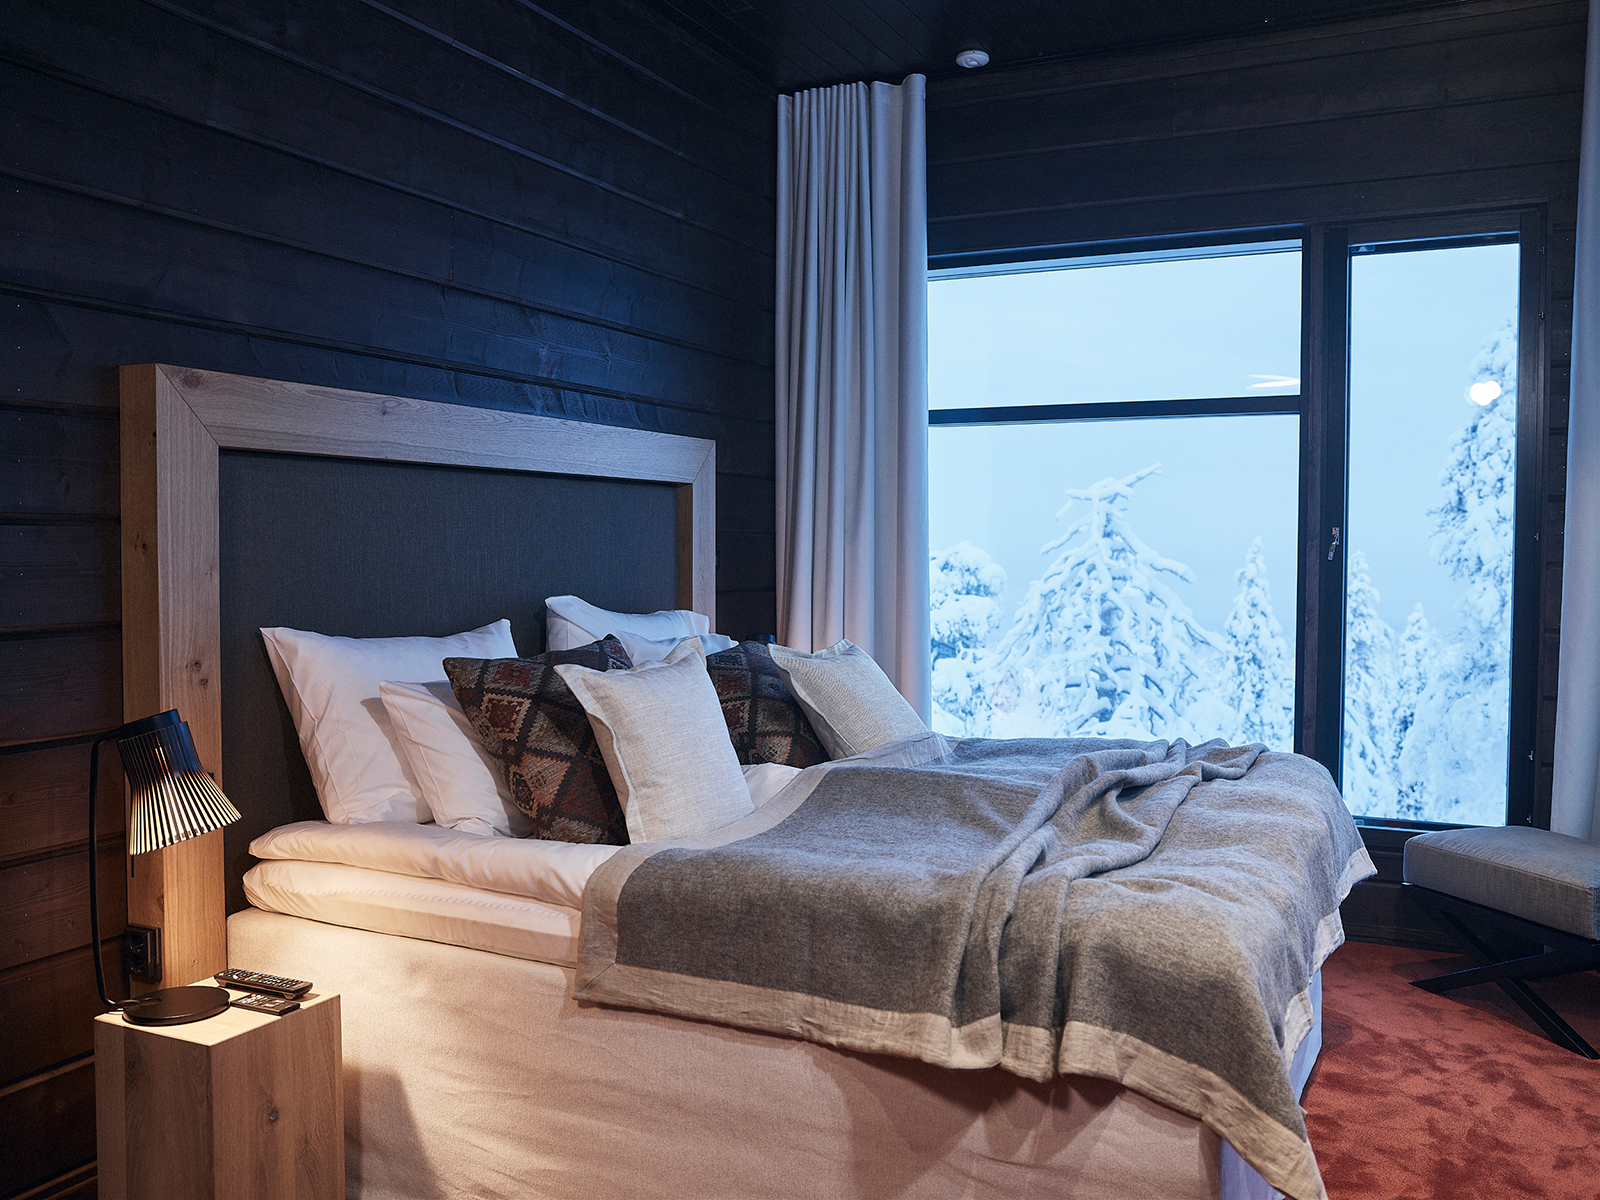 A bedroom with the Petite table lamp on a nightstand. Snow-covered trees behind the window.